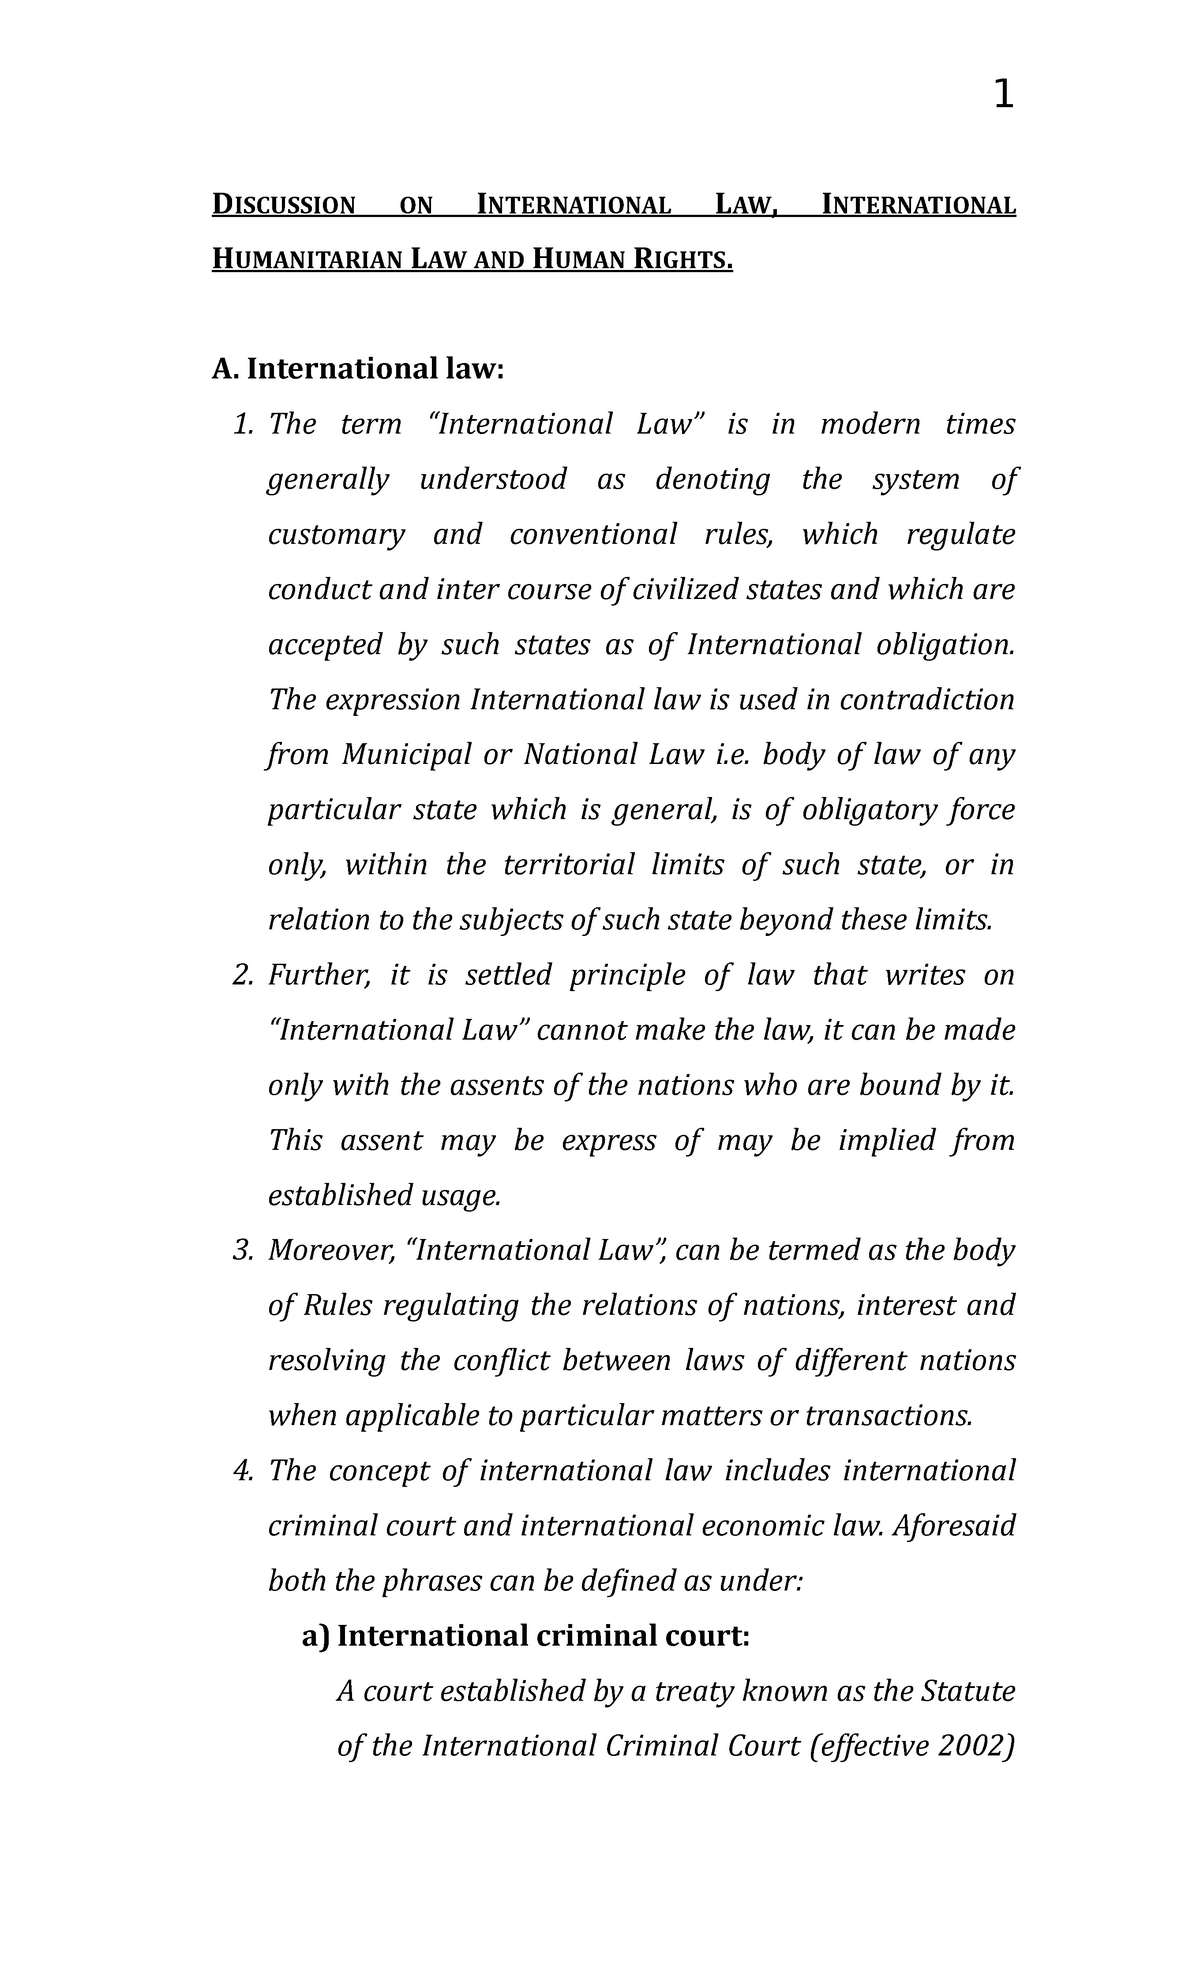 apii definition of noninternational armed conflict